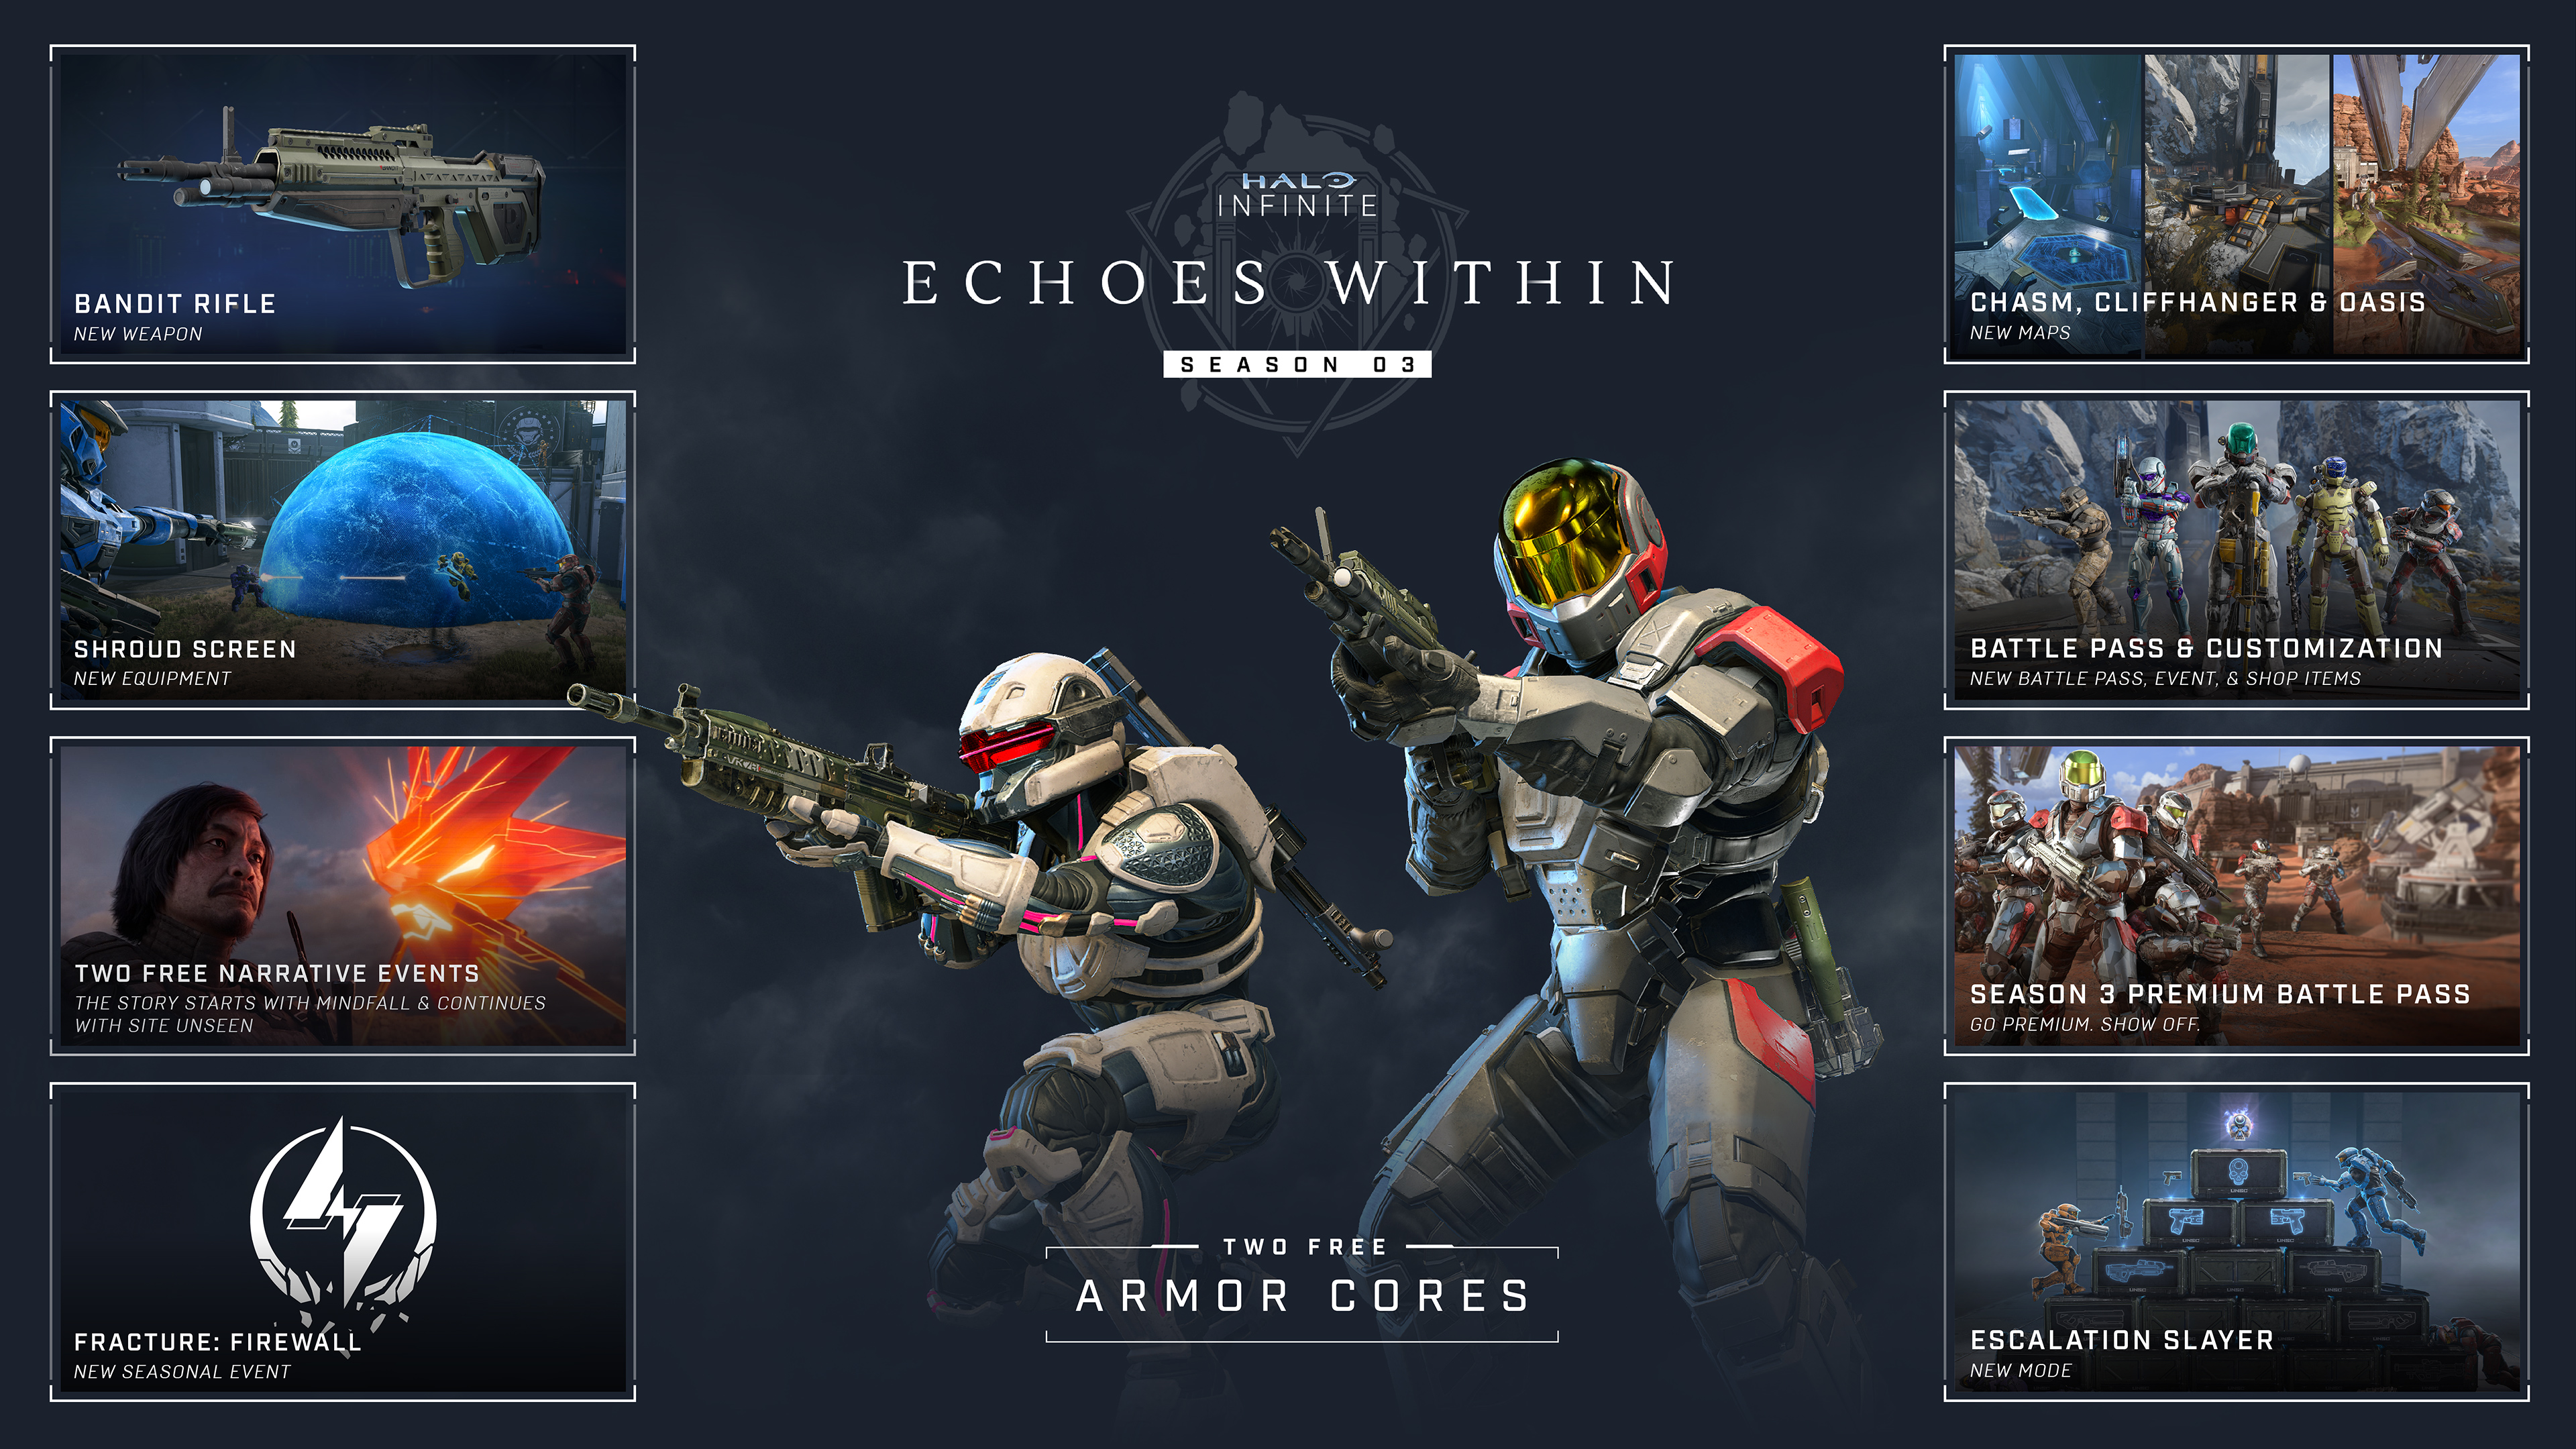 Battle Pass and Armor Image